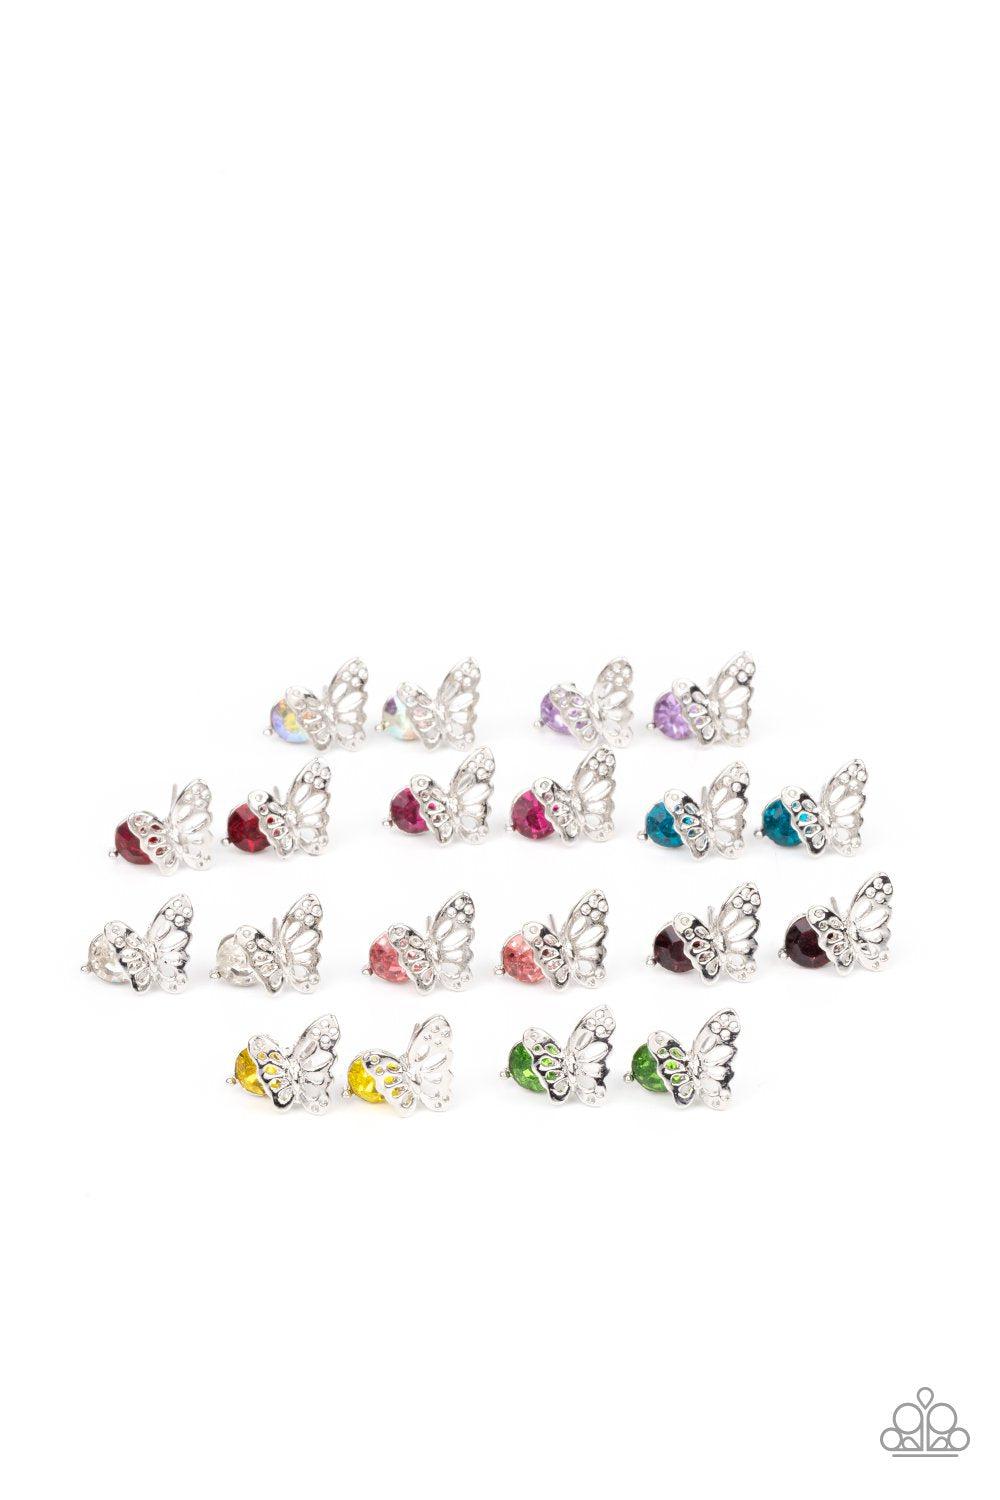 Starlet Shimmer Children&#39;s Butterfly and Rhinestone Post Earrings - Paparazzi Accessories (set of 10 pairs) - Full set -CarasShop.com - $5 Jewelry by Cara Jewels